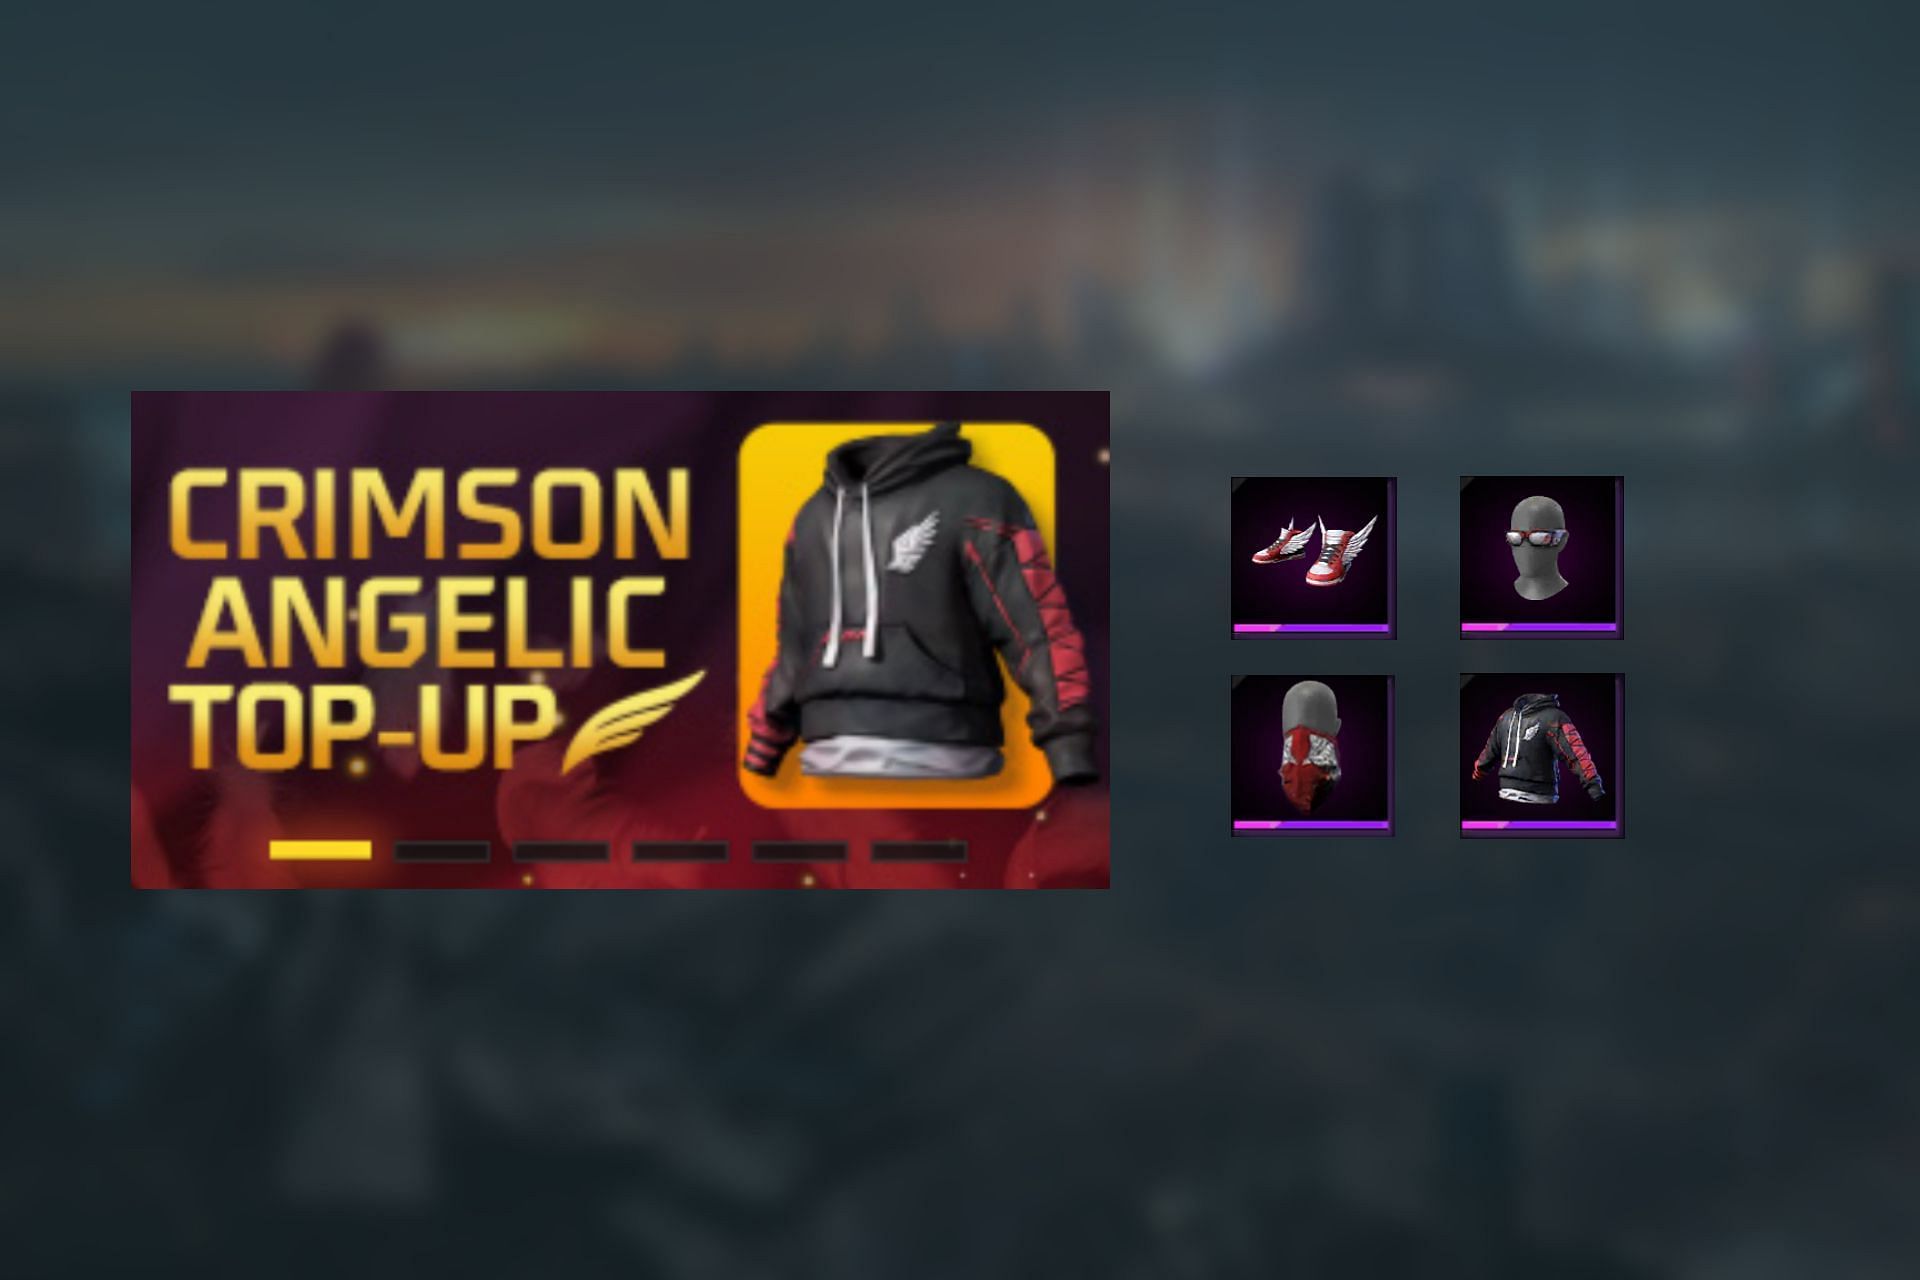 Details about the new Crimson Angelic Top-Up (image via Sportskeeda)